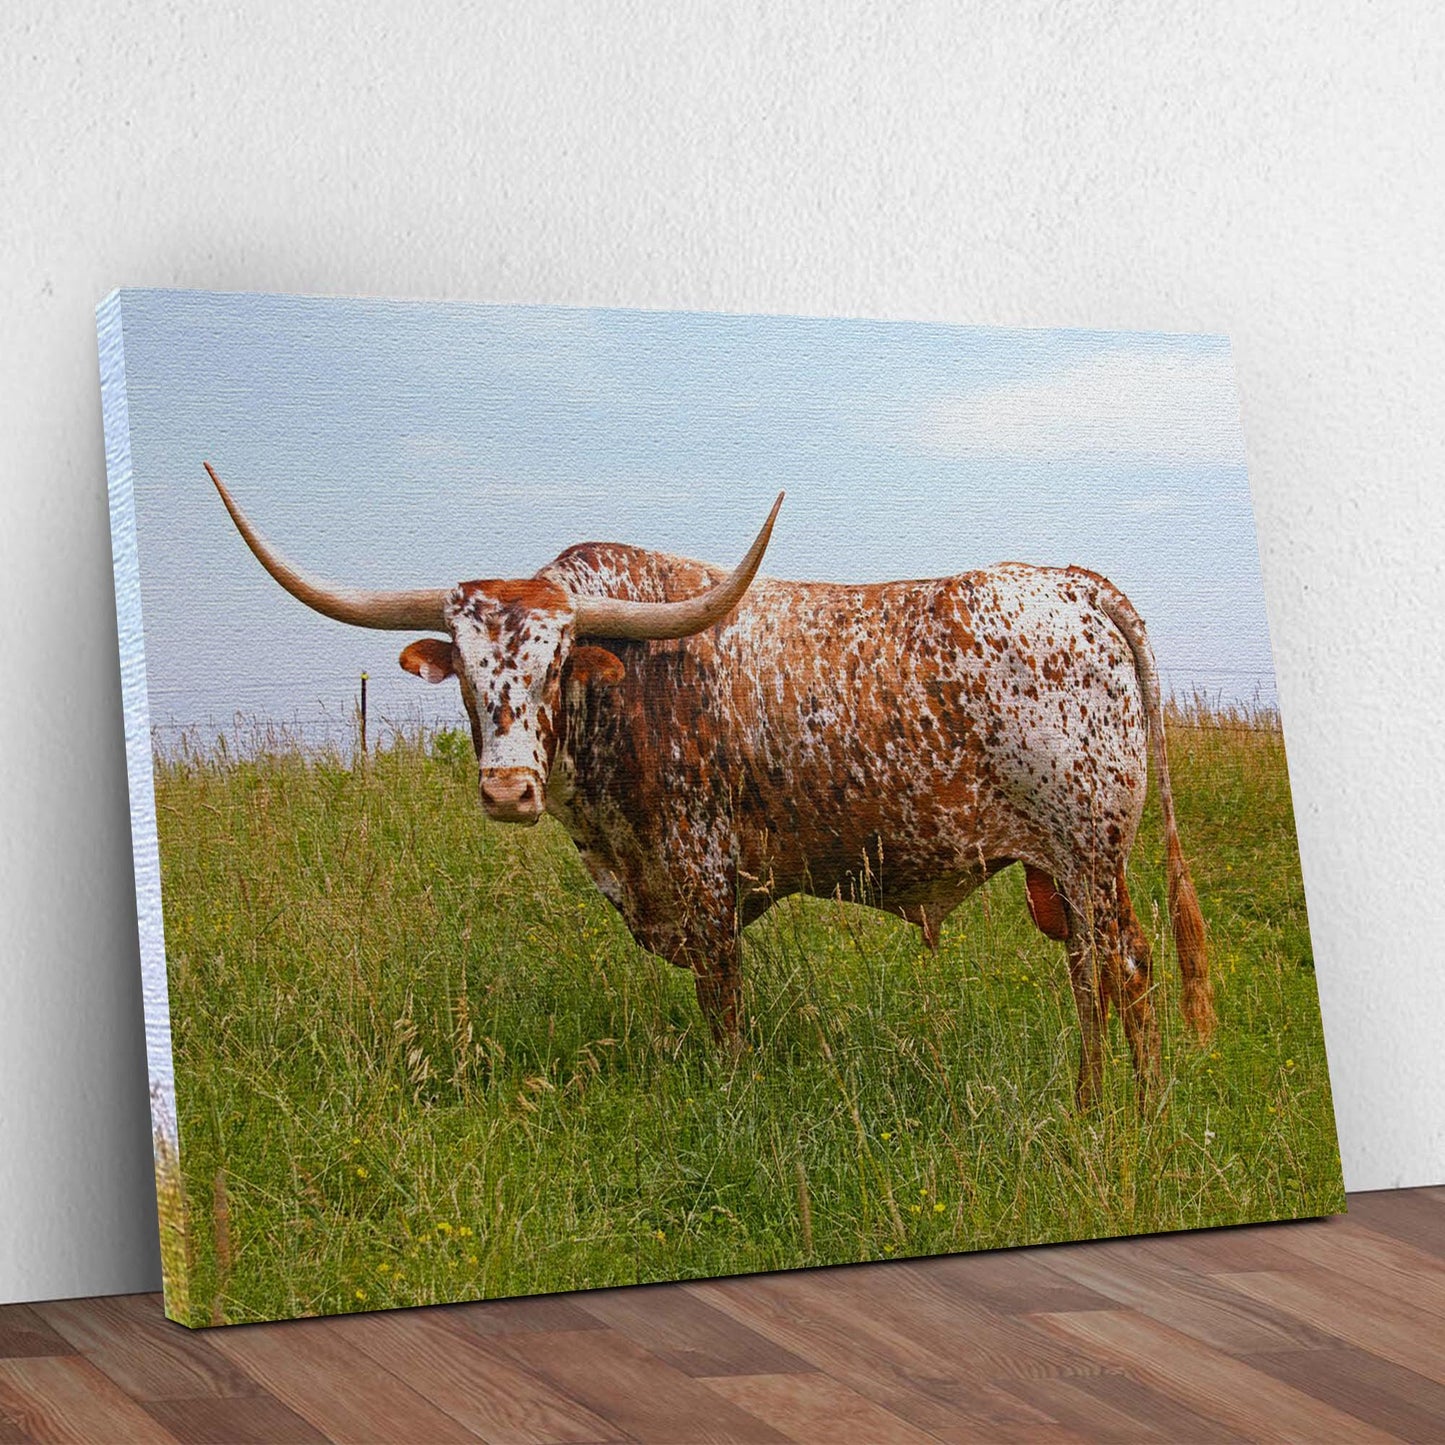 Texas Longhorn Cattle Canvas Wall Art Style 2 - Image by Tailored Canvases